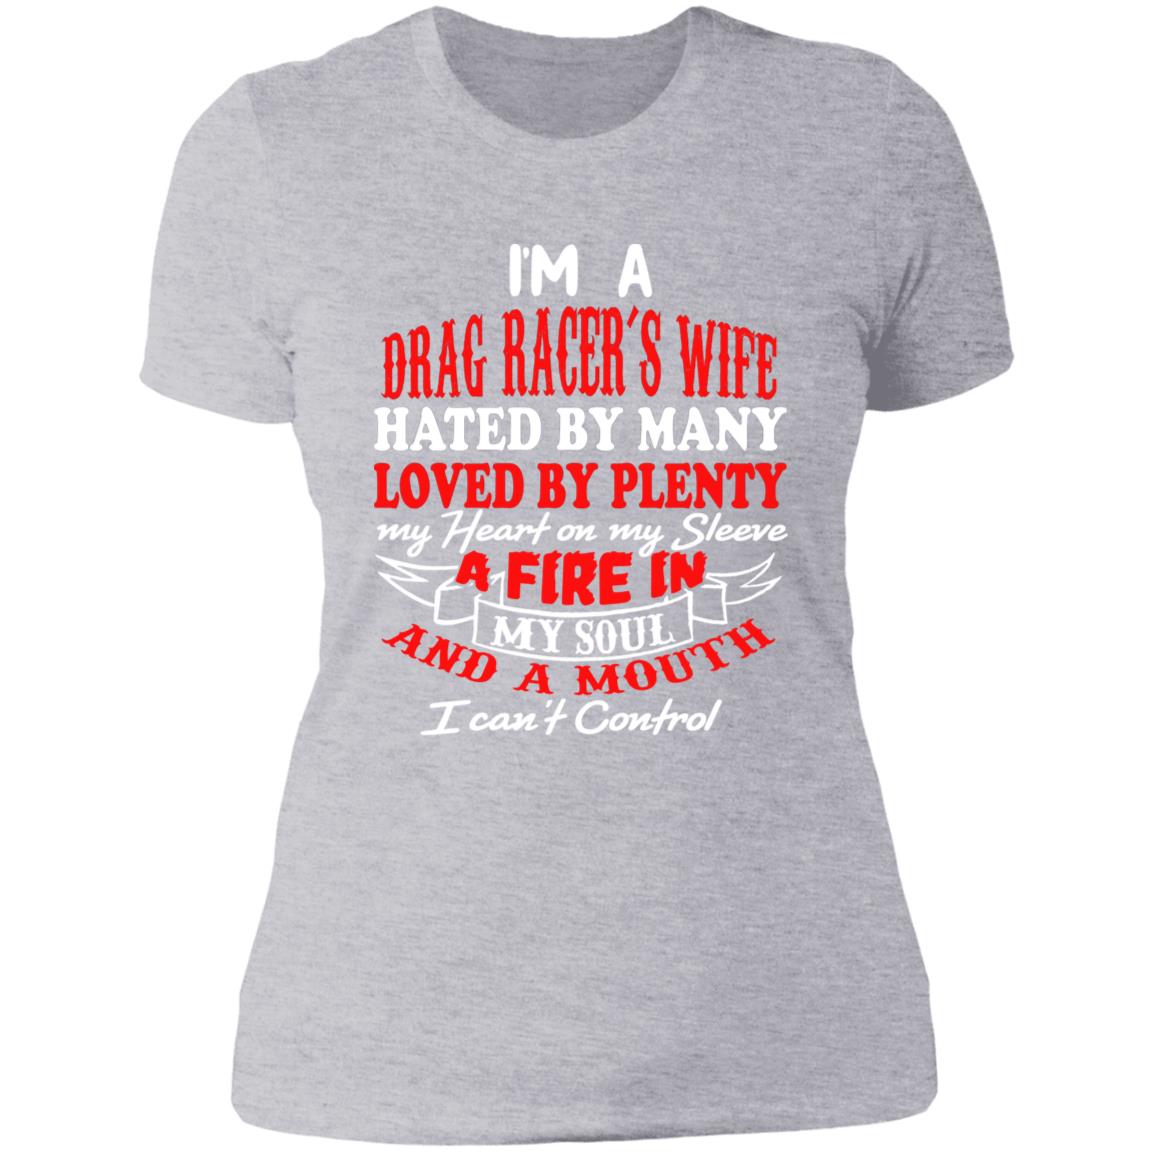 I'm A Drag Racer's Wife Hated By Many Loved By Plenty Ladies' Boyfriend T-Shirt